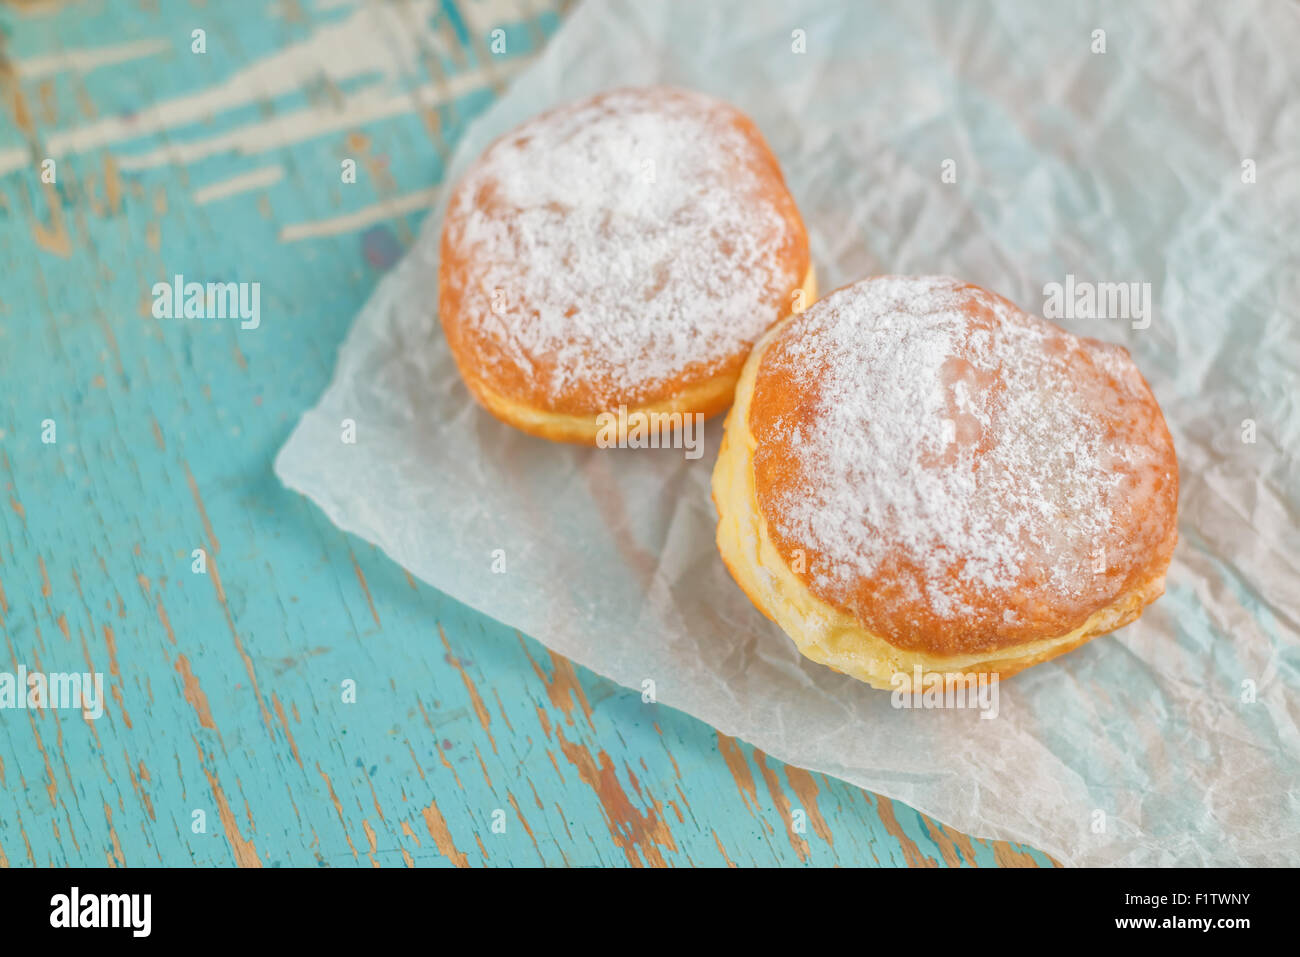 Sweet sugary donuts on rustic wooden kitchen table, tasty bakery doughnuts on crumpled baking paper in vintage retro toned image Stock Photo